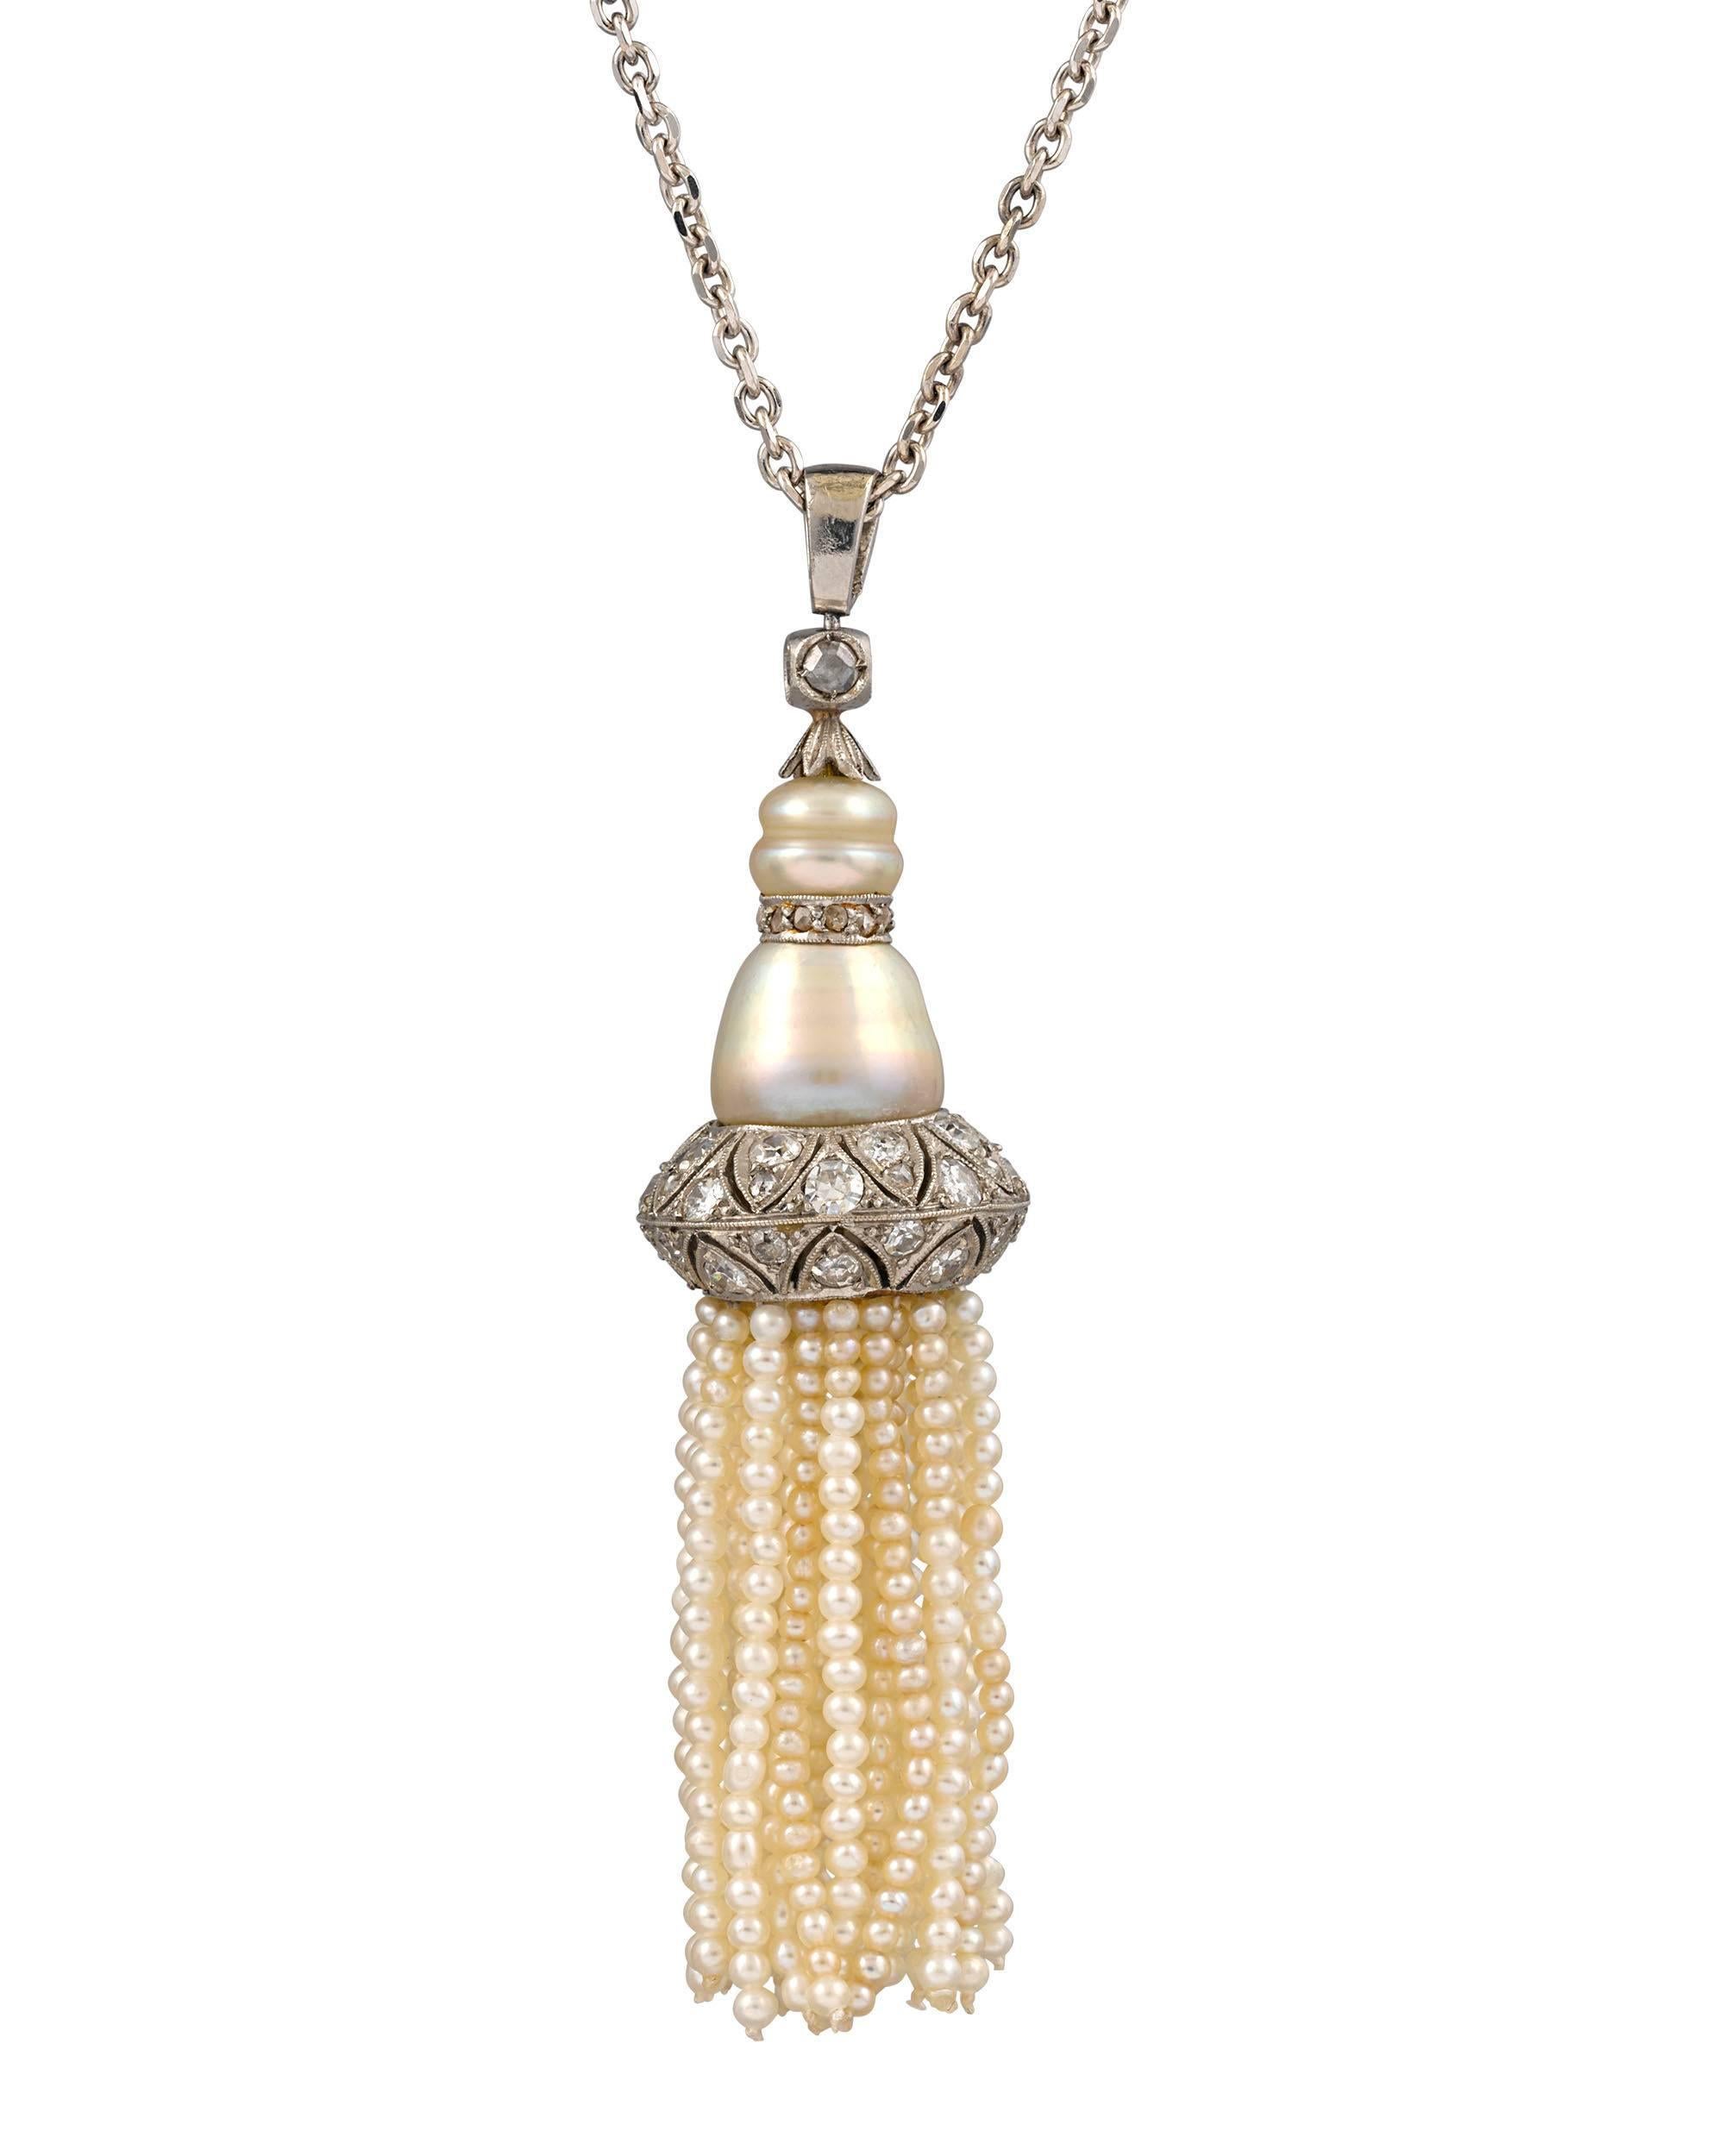 This elegant Art Deco sautoir, or tassel necklace, epitomizes femininity and timeless style. Exquisite strands of natural pearls dangle from the pearl pendant, which is encrusted with white diamonds for the perfect amount of sparkle. Bold with a